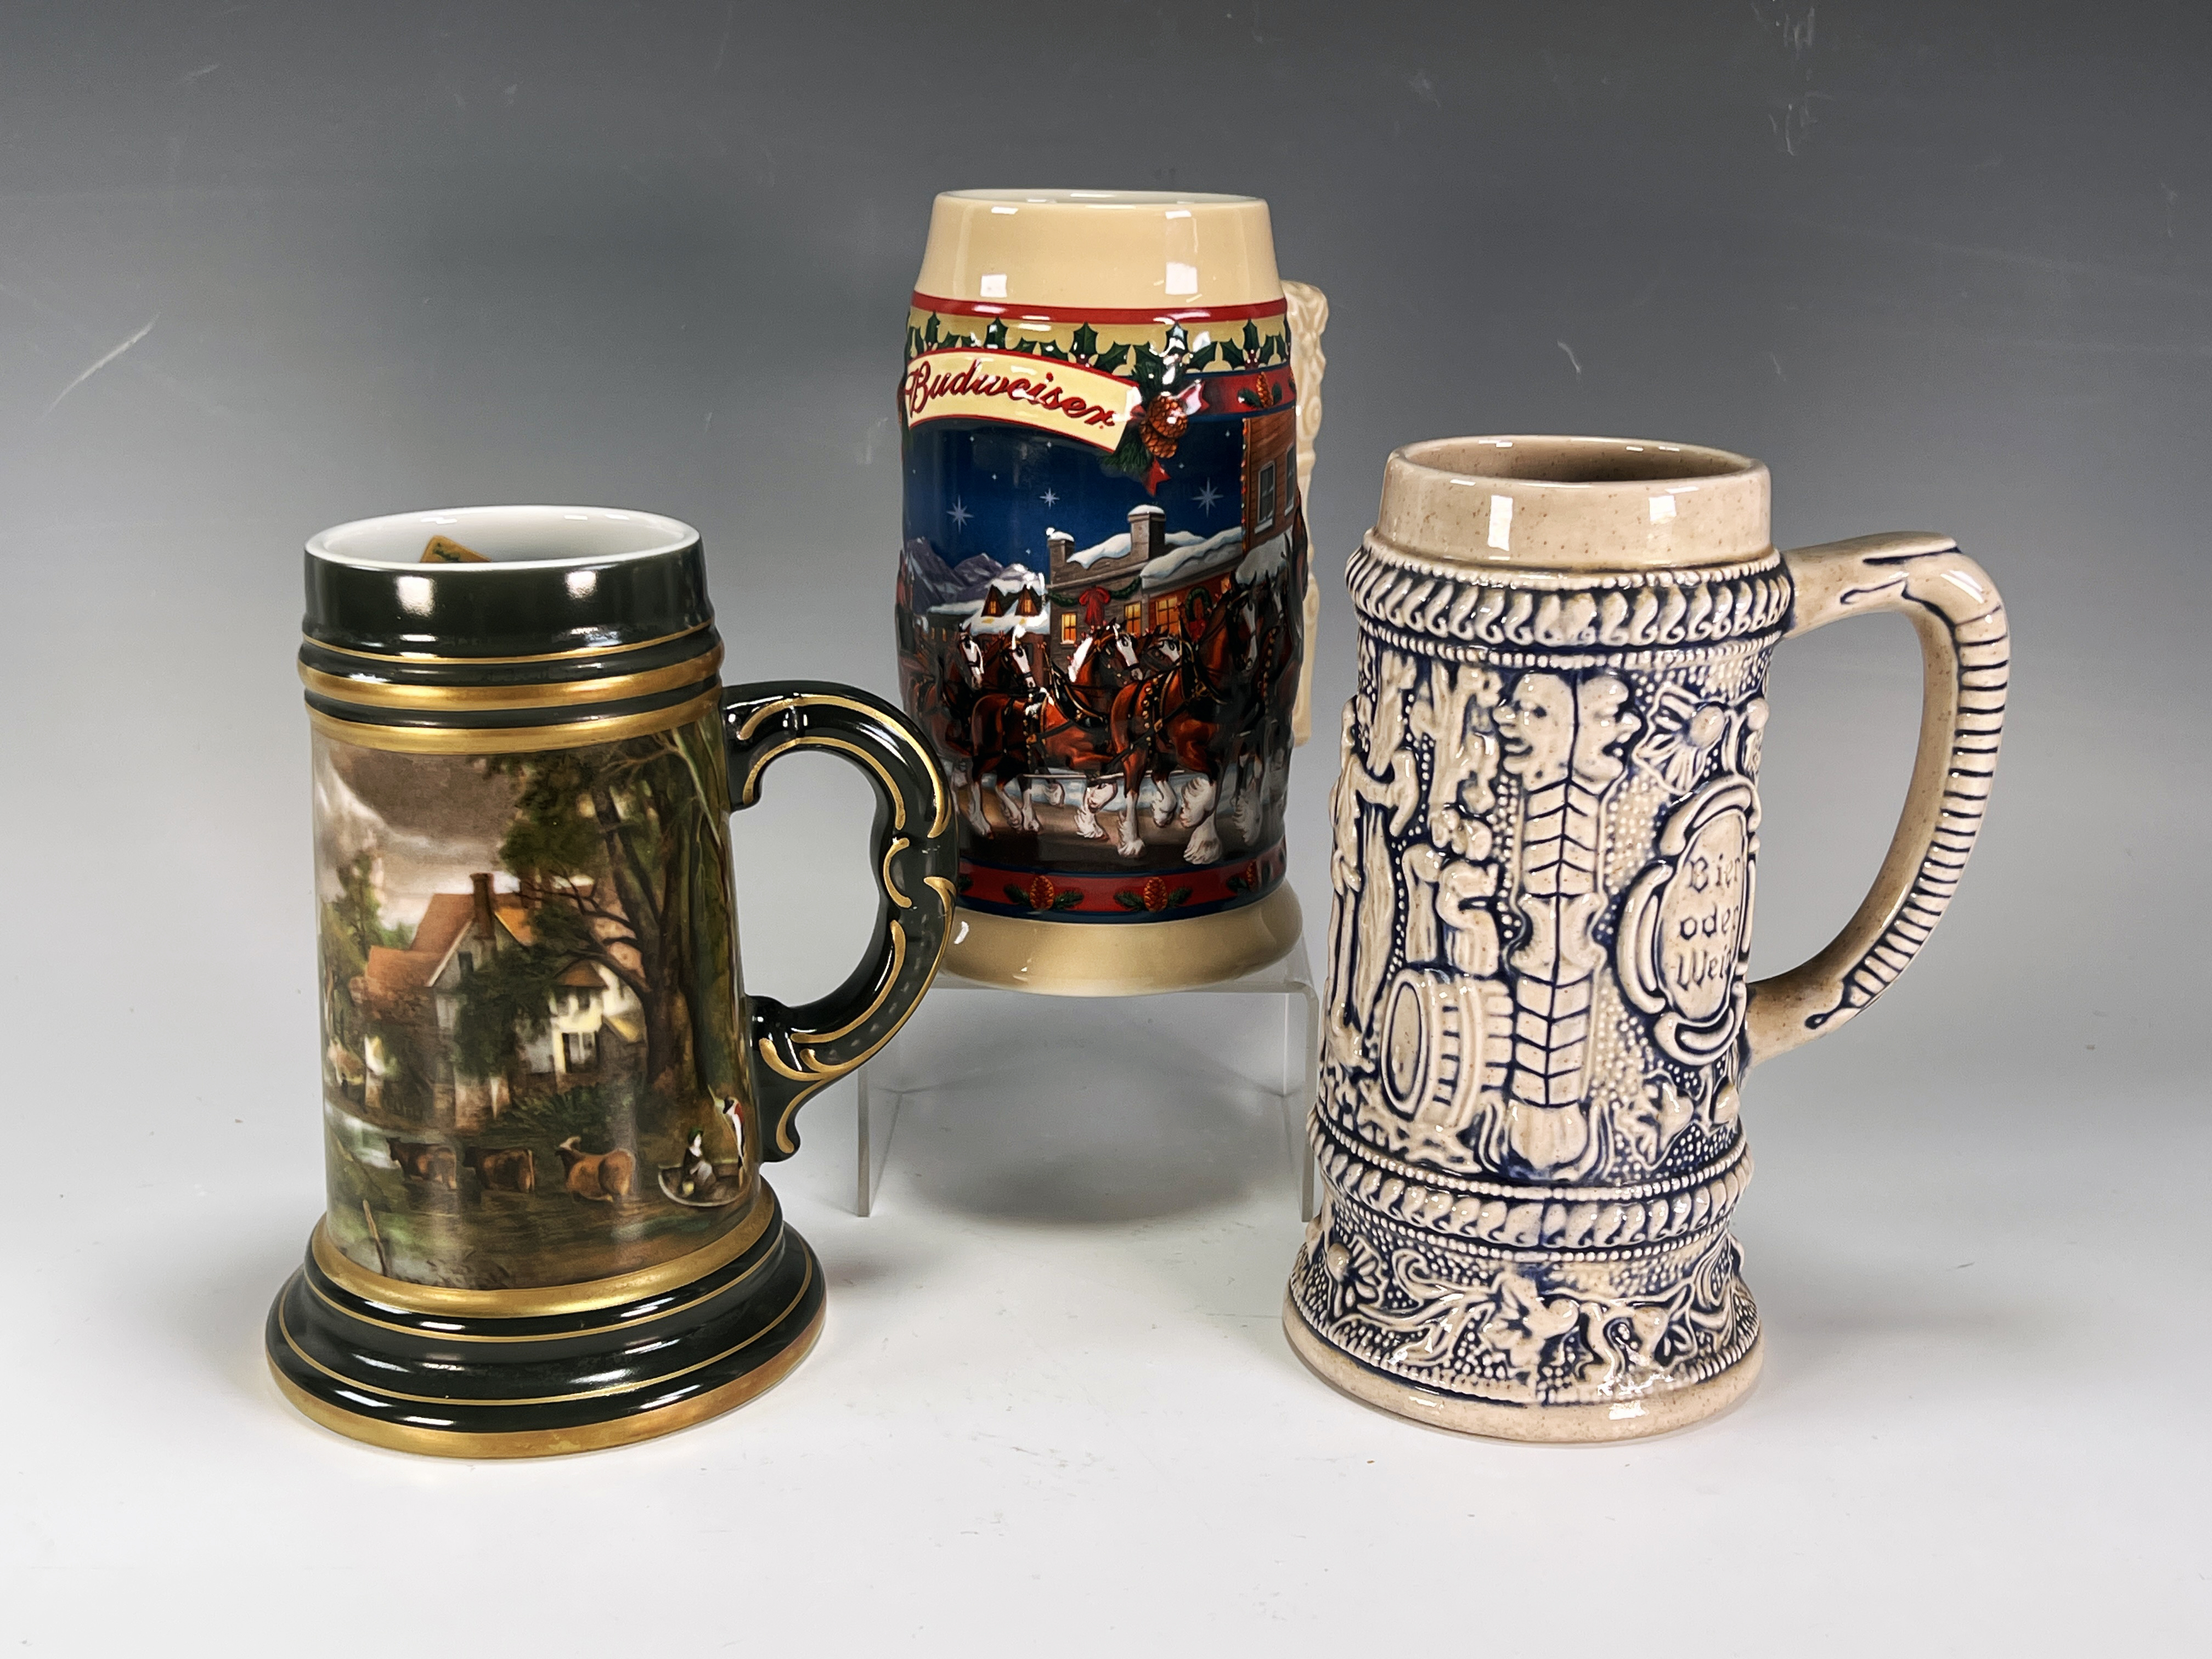 3 Beer Steins West Germany Anheuser Busch image 1